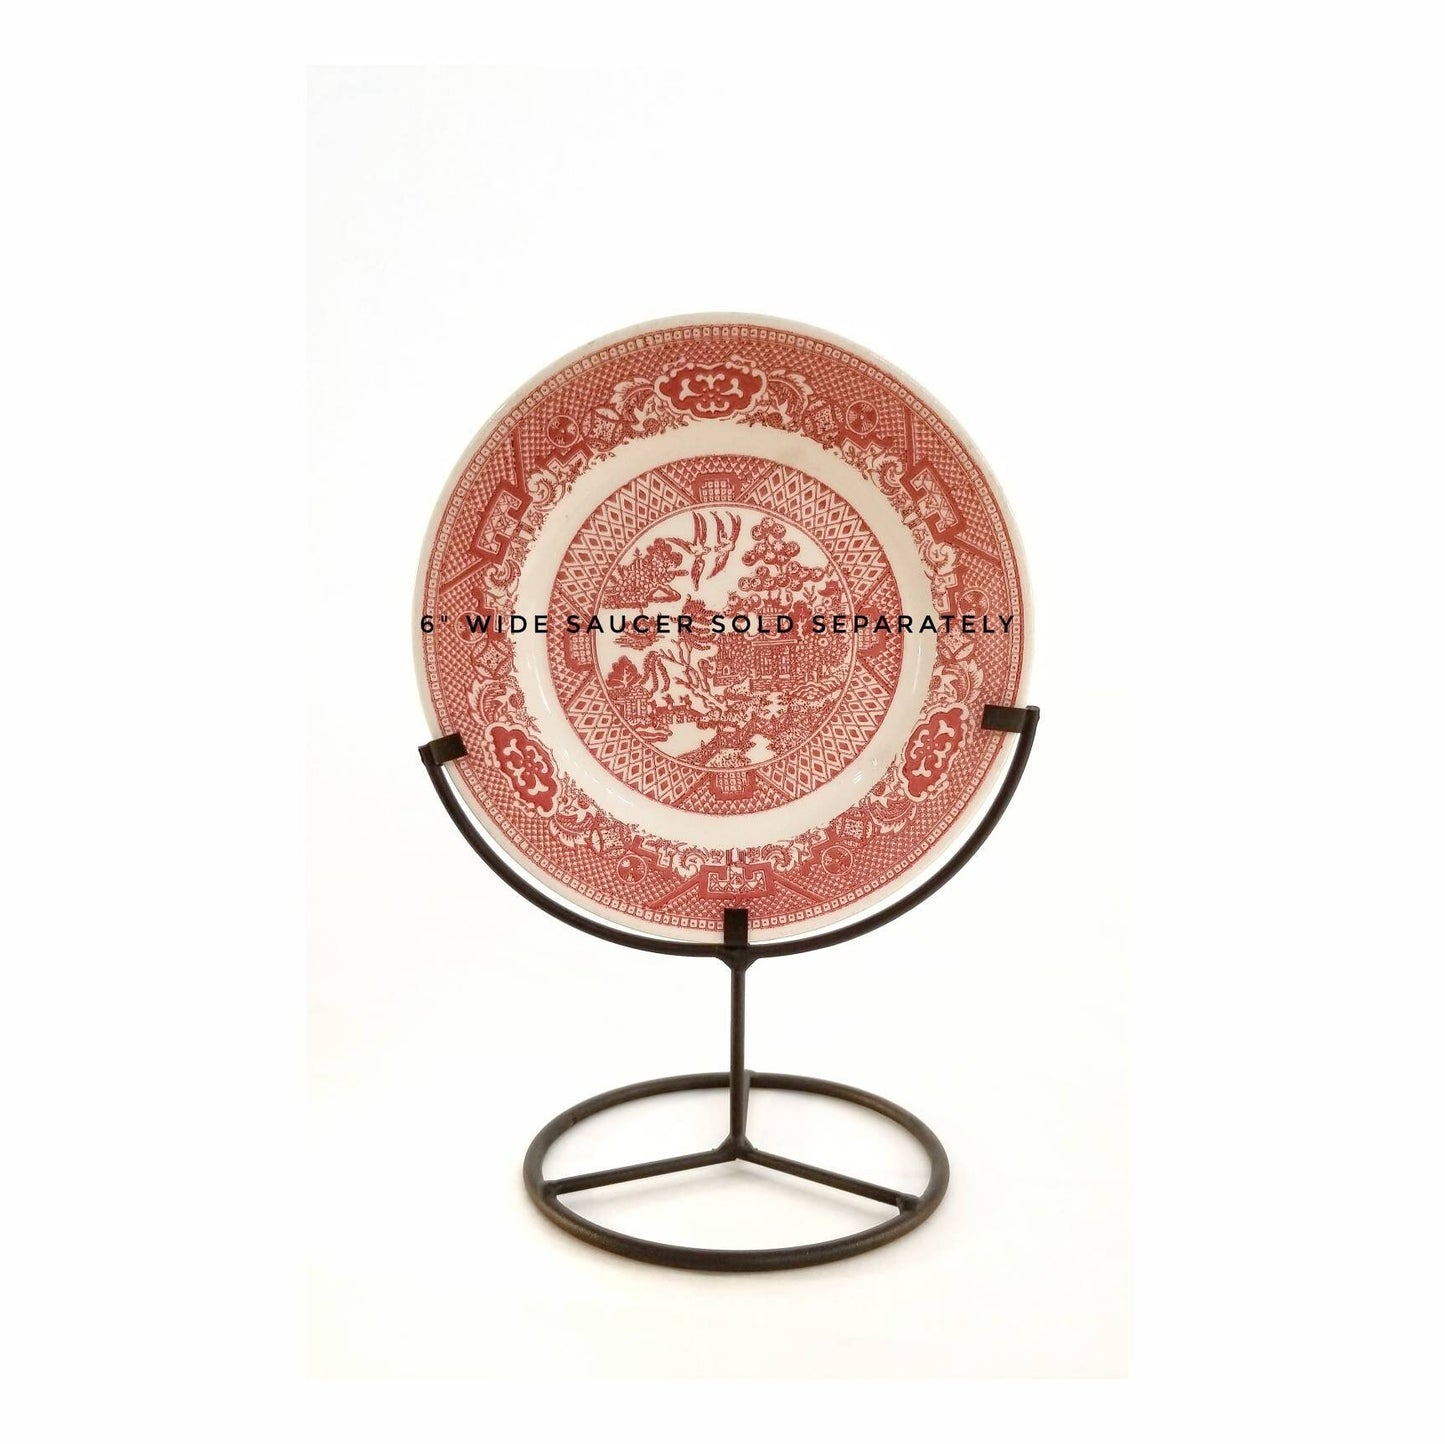 Black metal display stand for stained or fused art glass Holds round artwork 5.5" to 6" wide, half circle frame, Small plate Saucer Holder